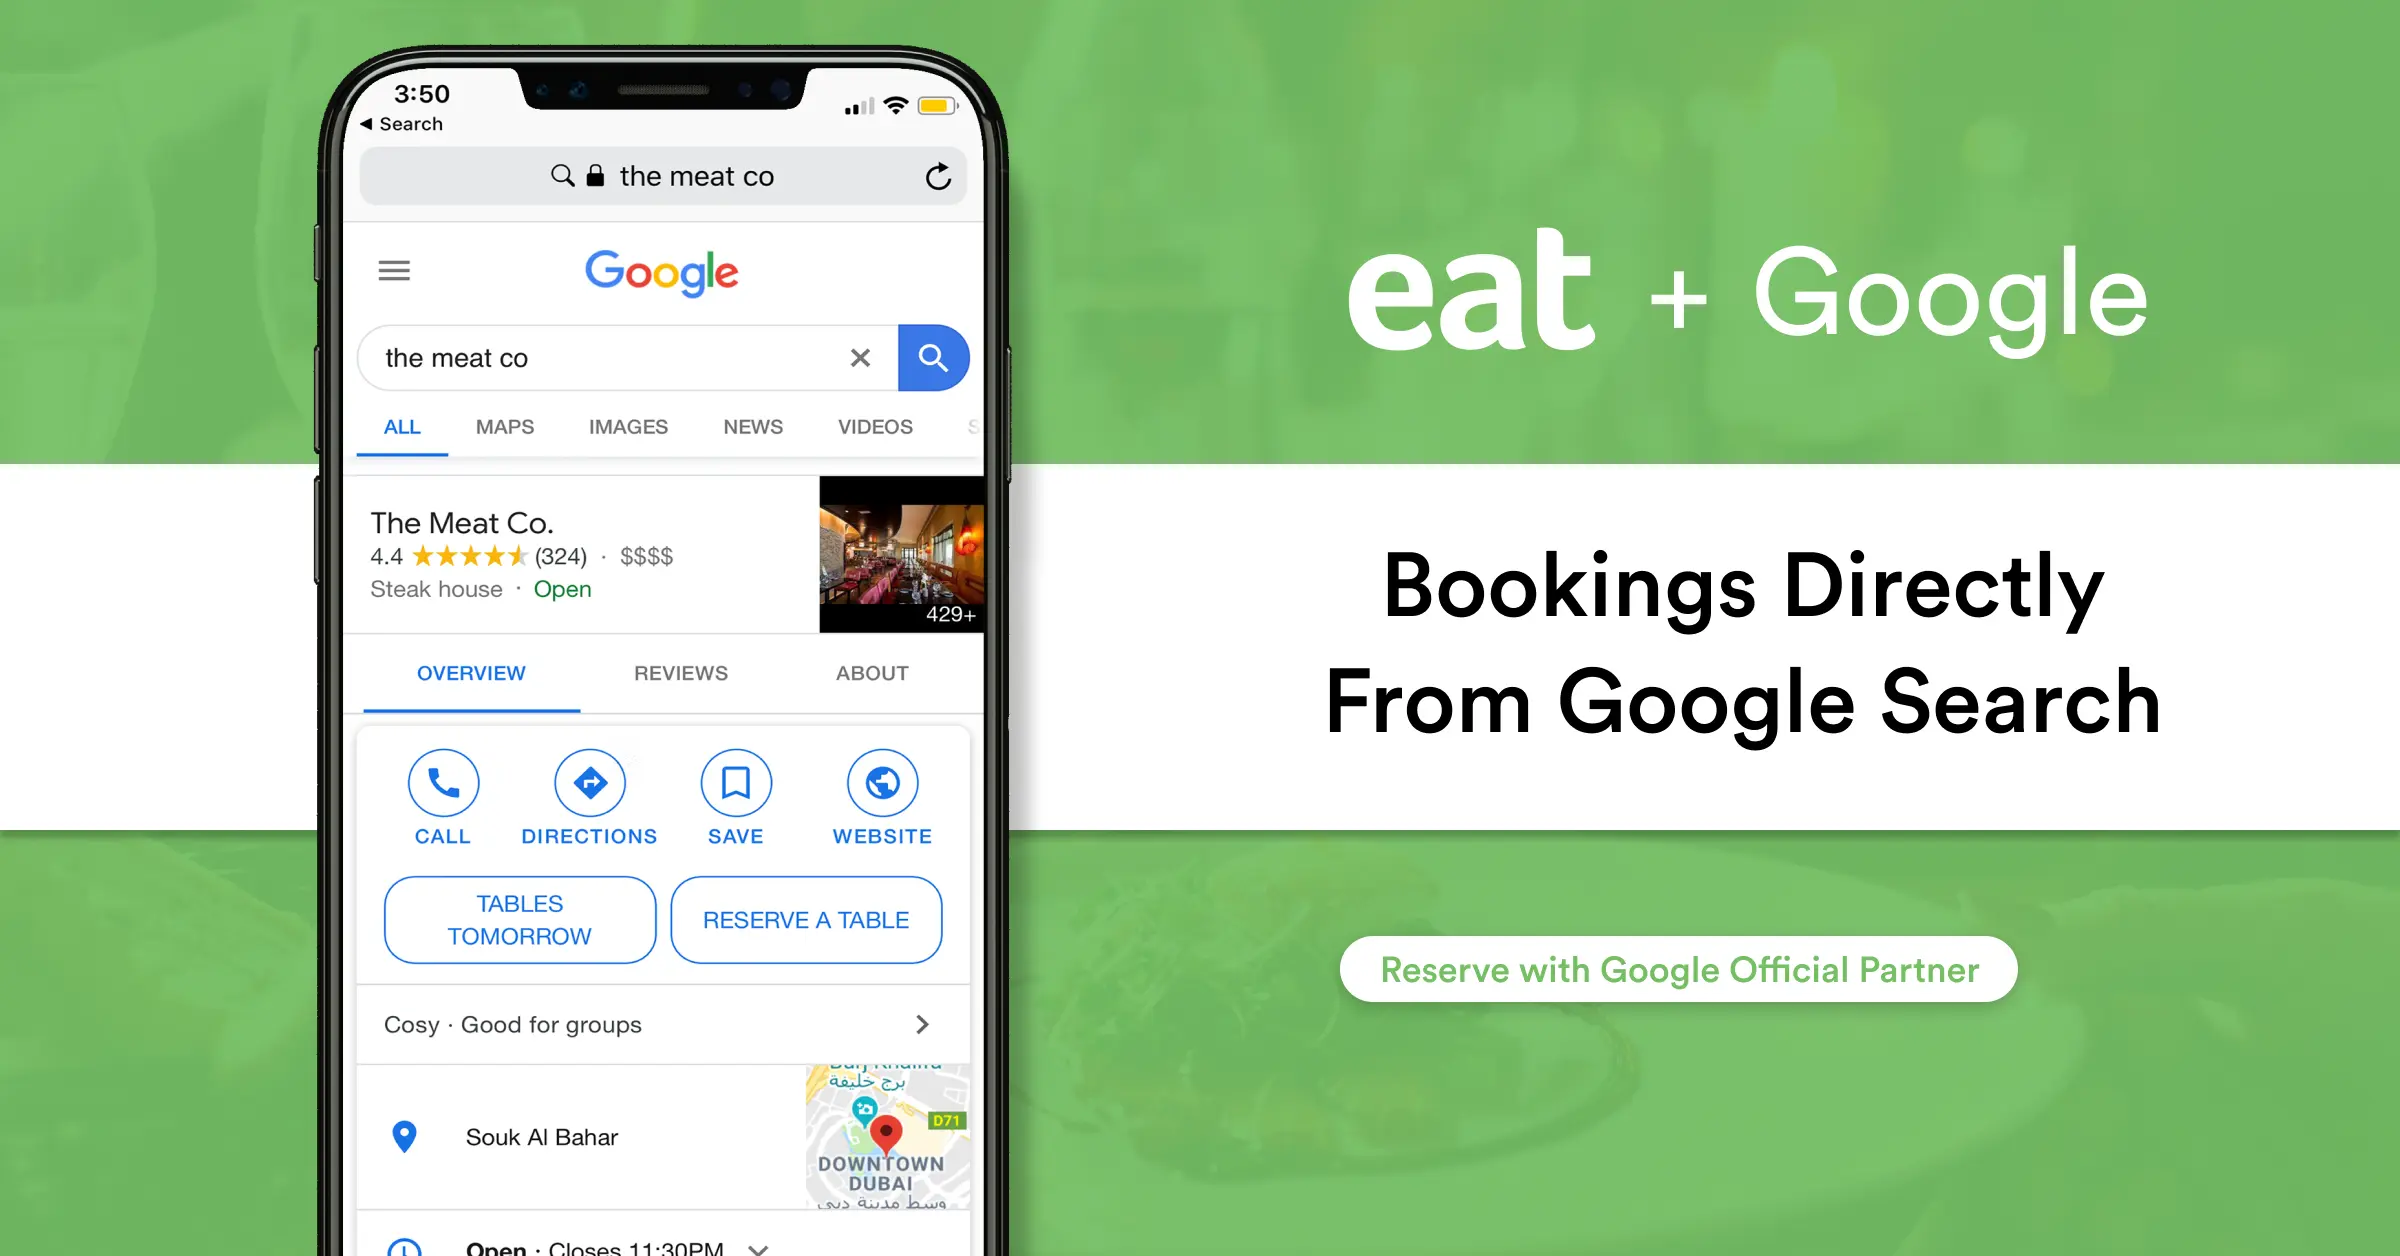 Google Integrates OpenTable Into Mobile App - Eater